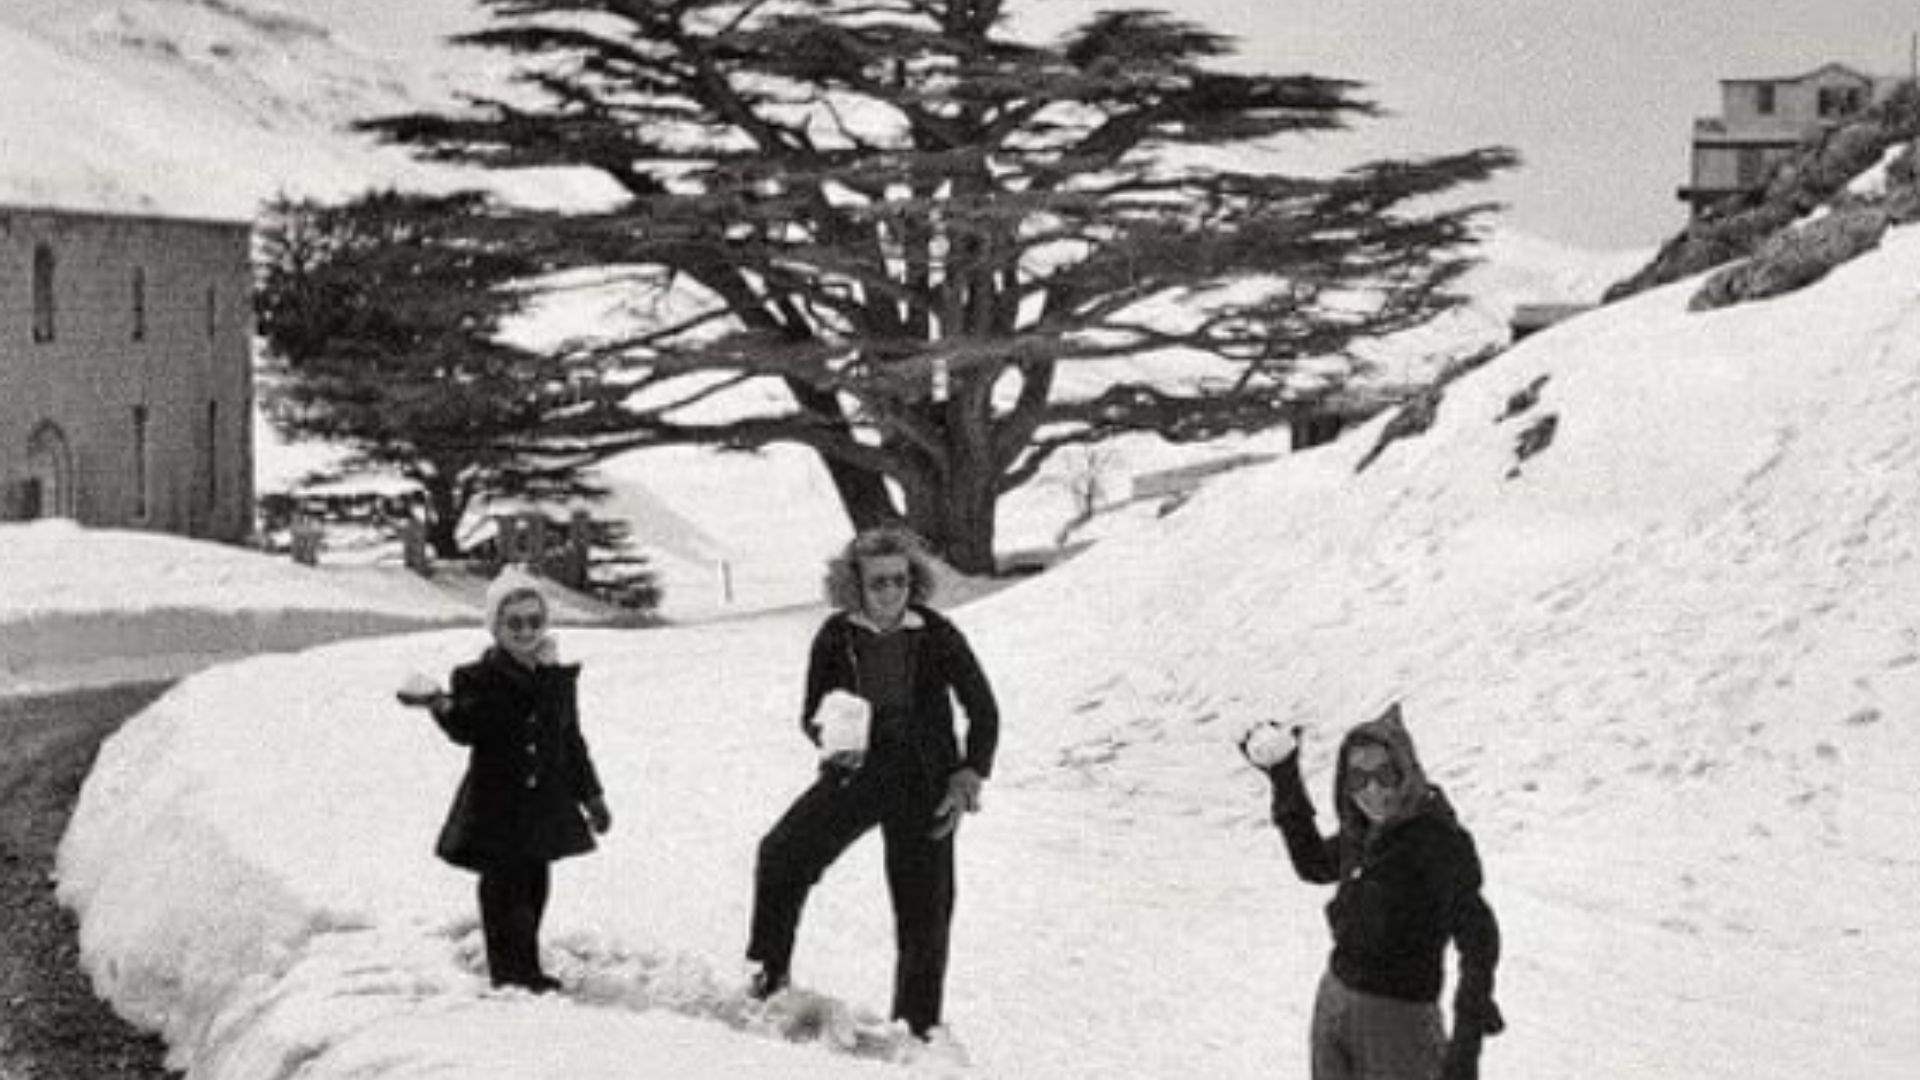 Vintage photos show winter days in old Lebanon